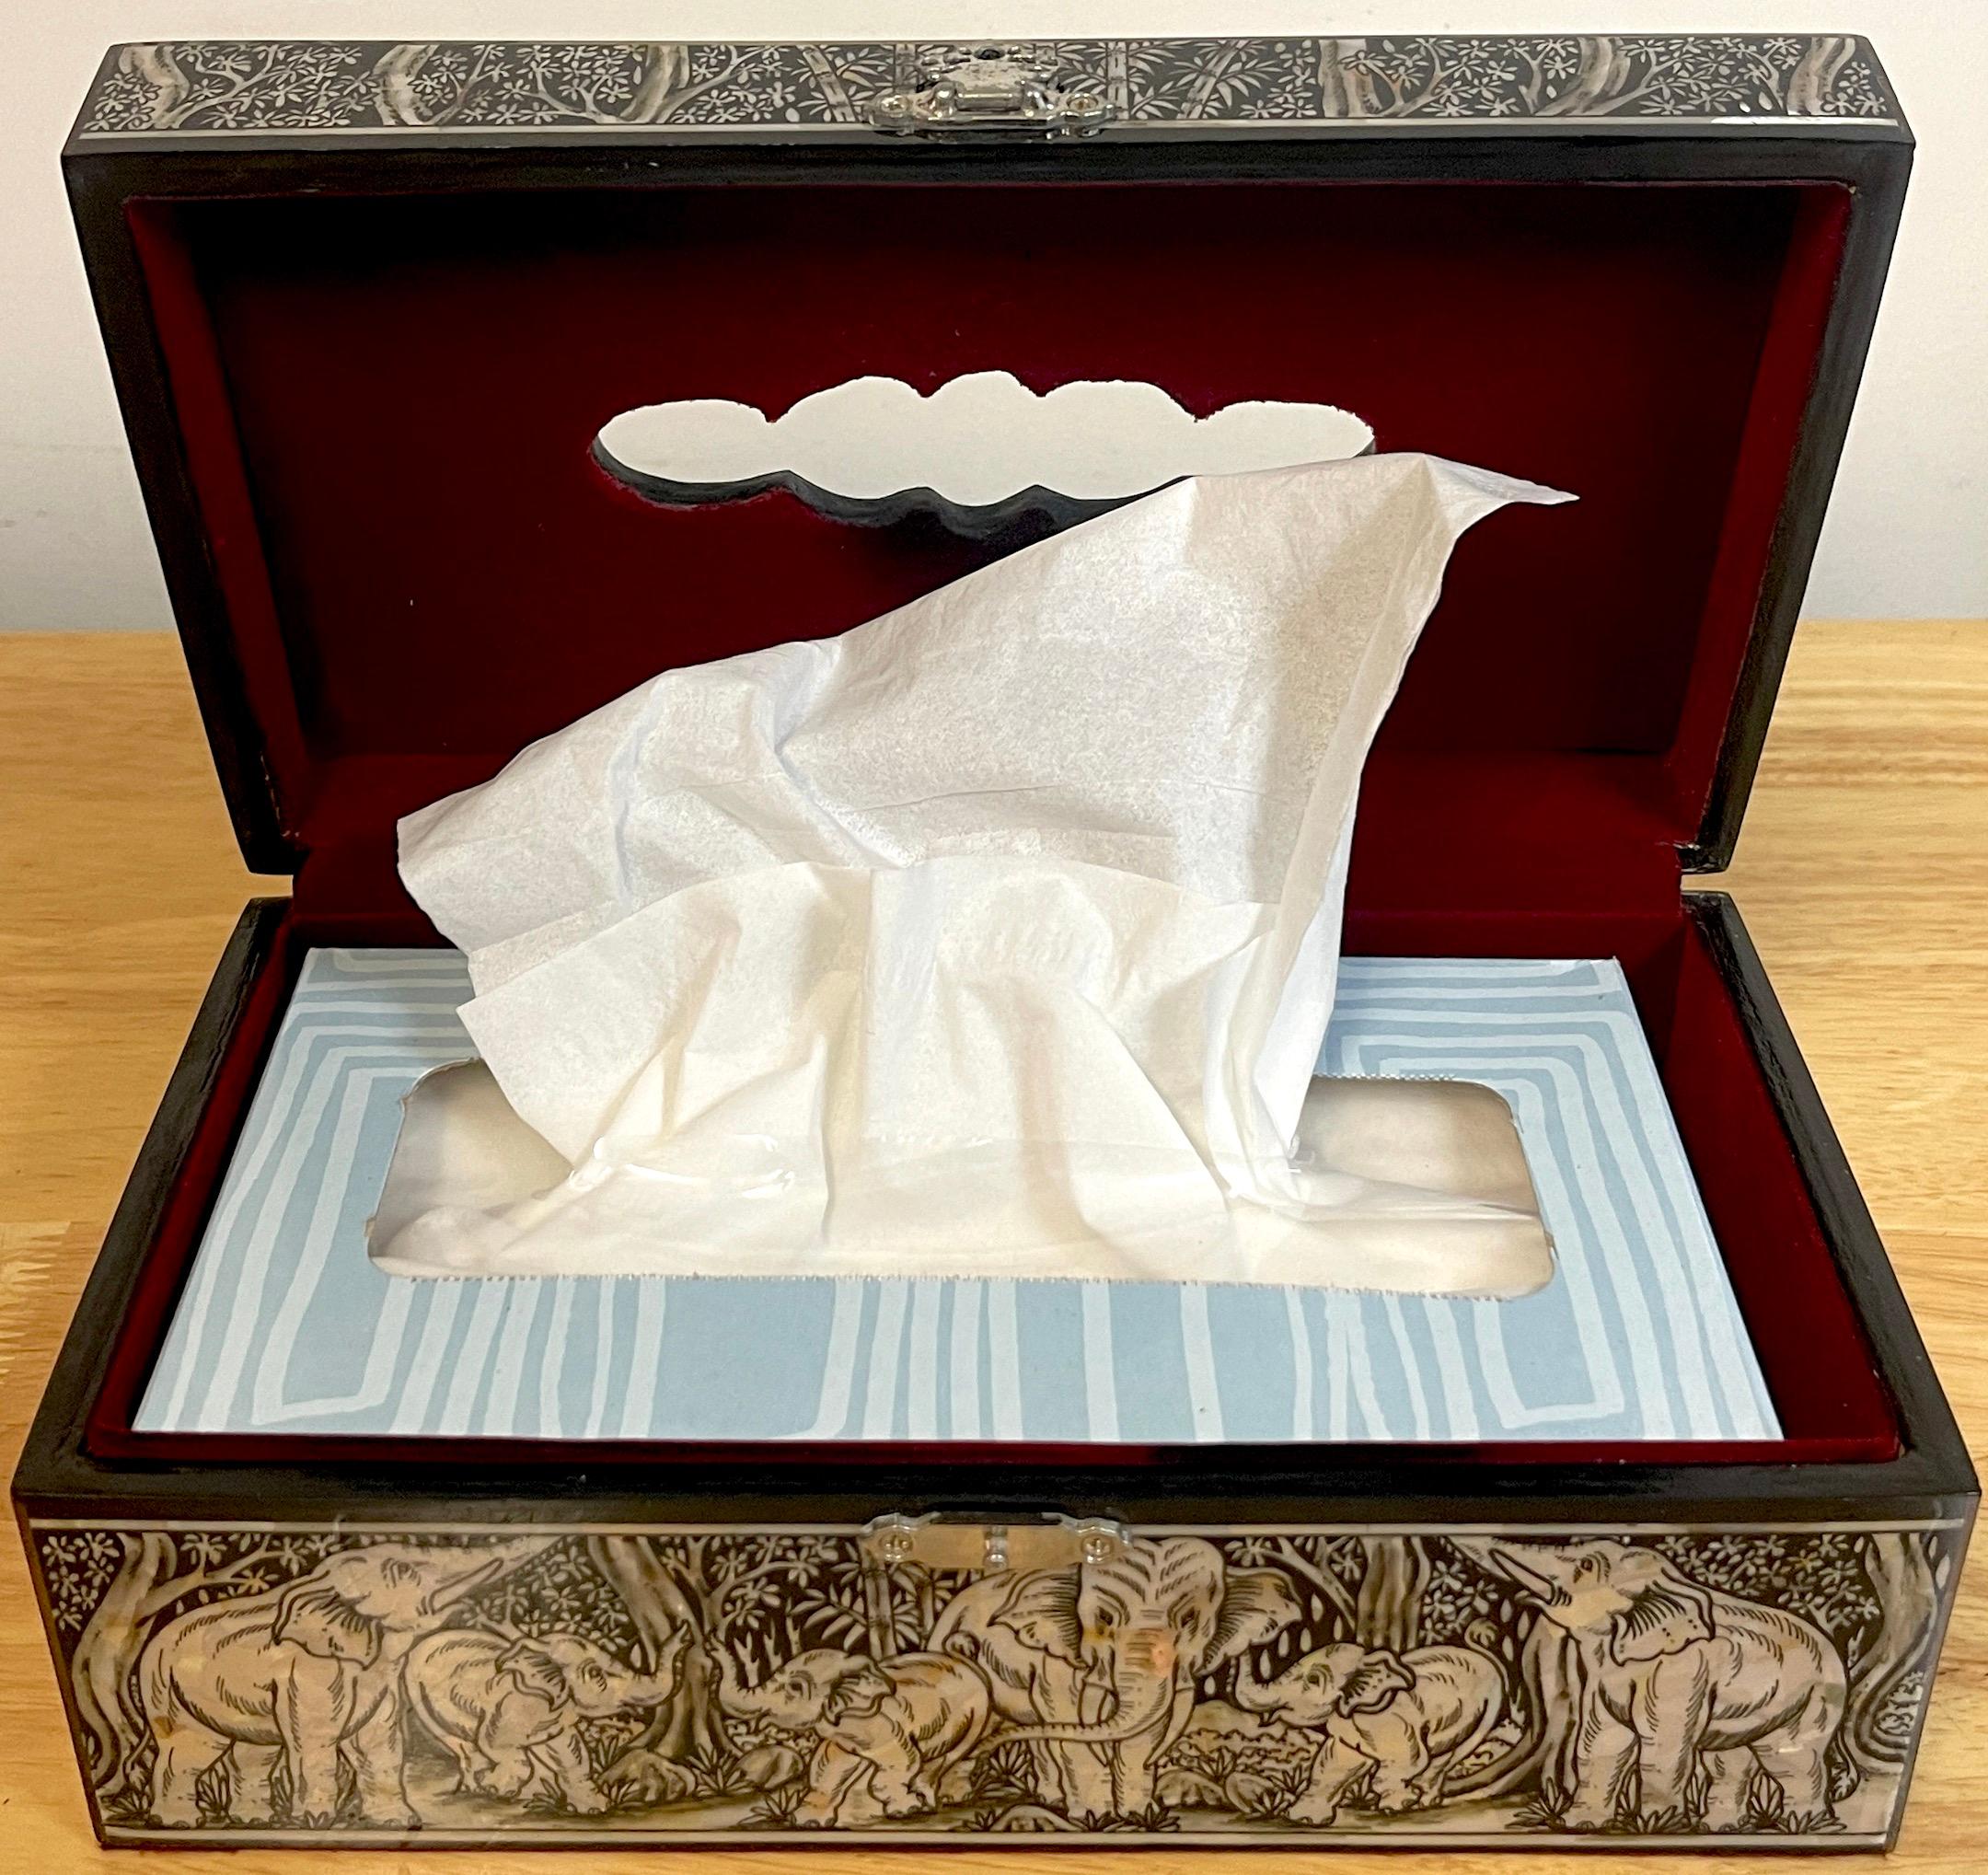 Exquisite Mother of Pearl Inlaid Lacquer Elephant Motif Tissue Box For Sale 2